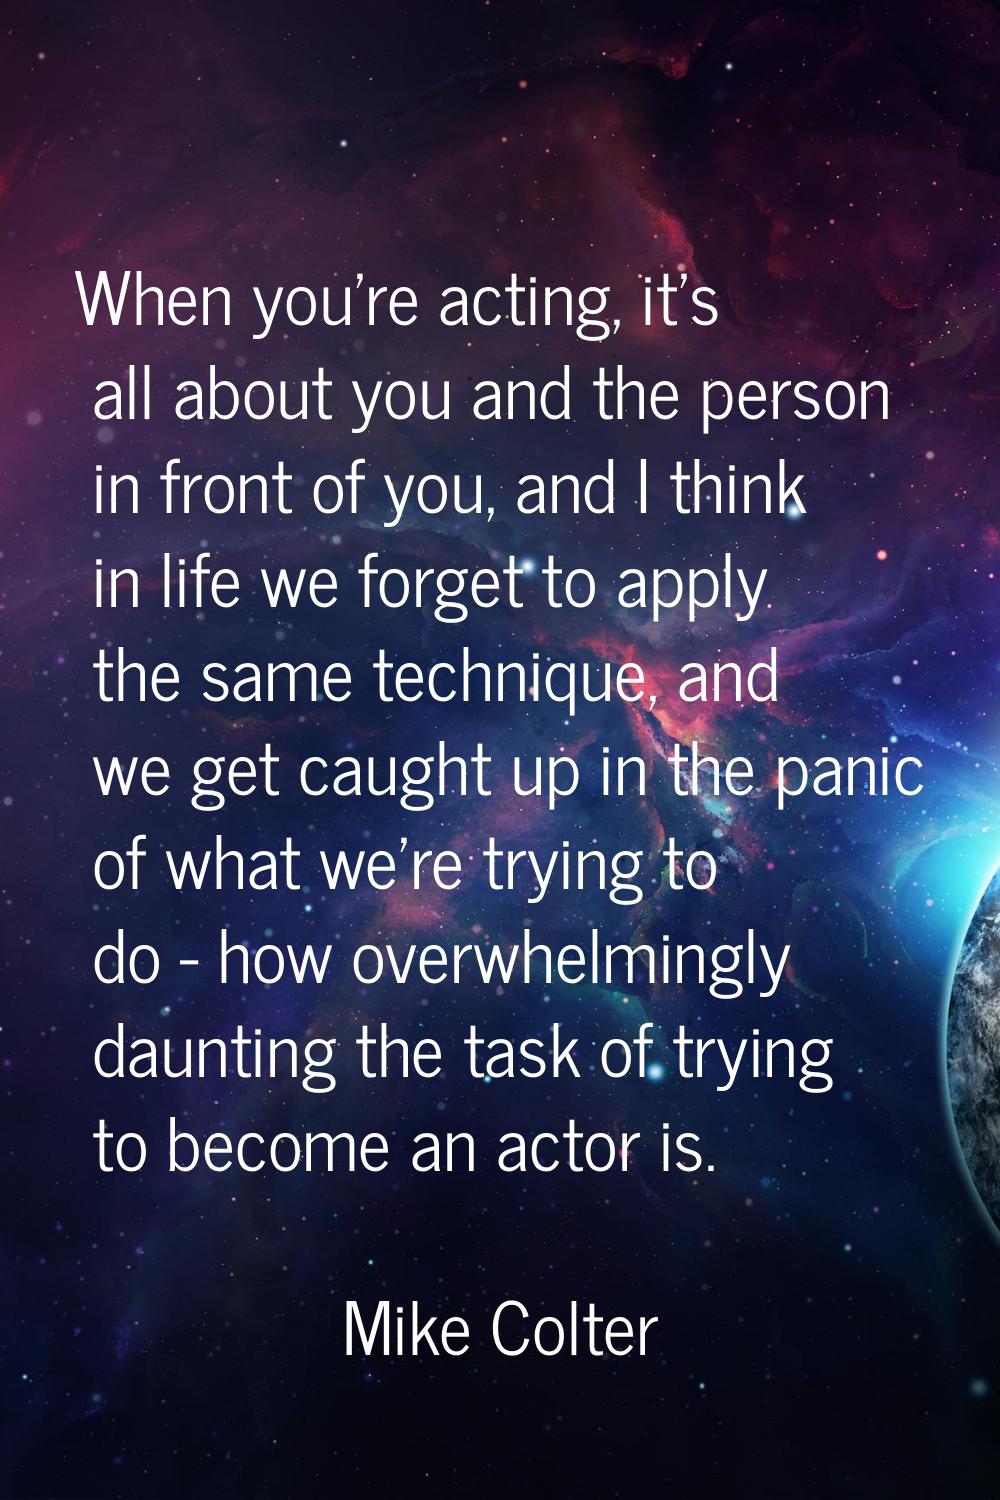 When you're acting, it's all about you and the person in front of you, and I think in life we forge